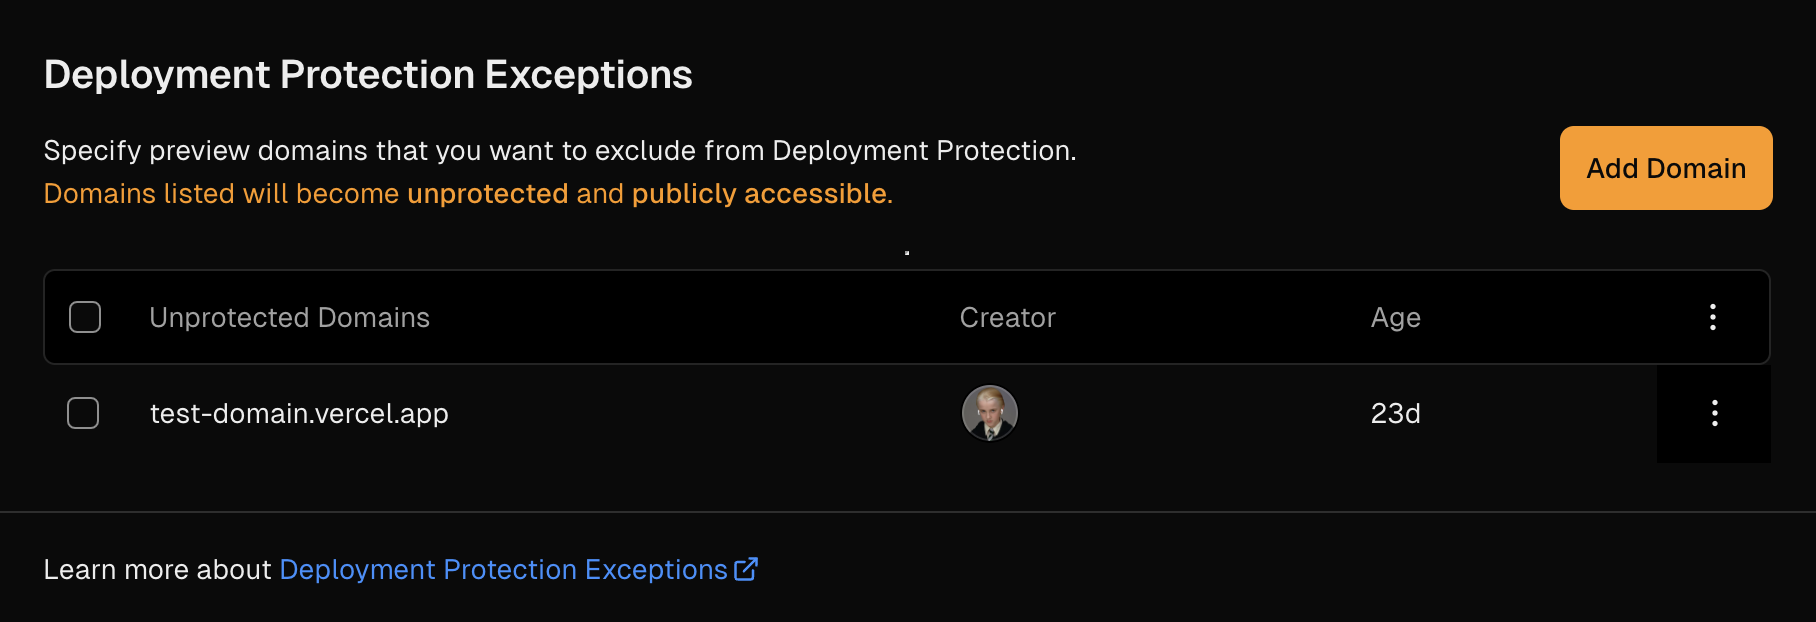 Deployment Protection Exceptions.